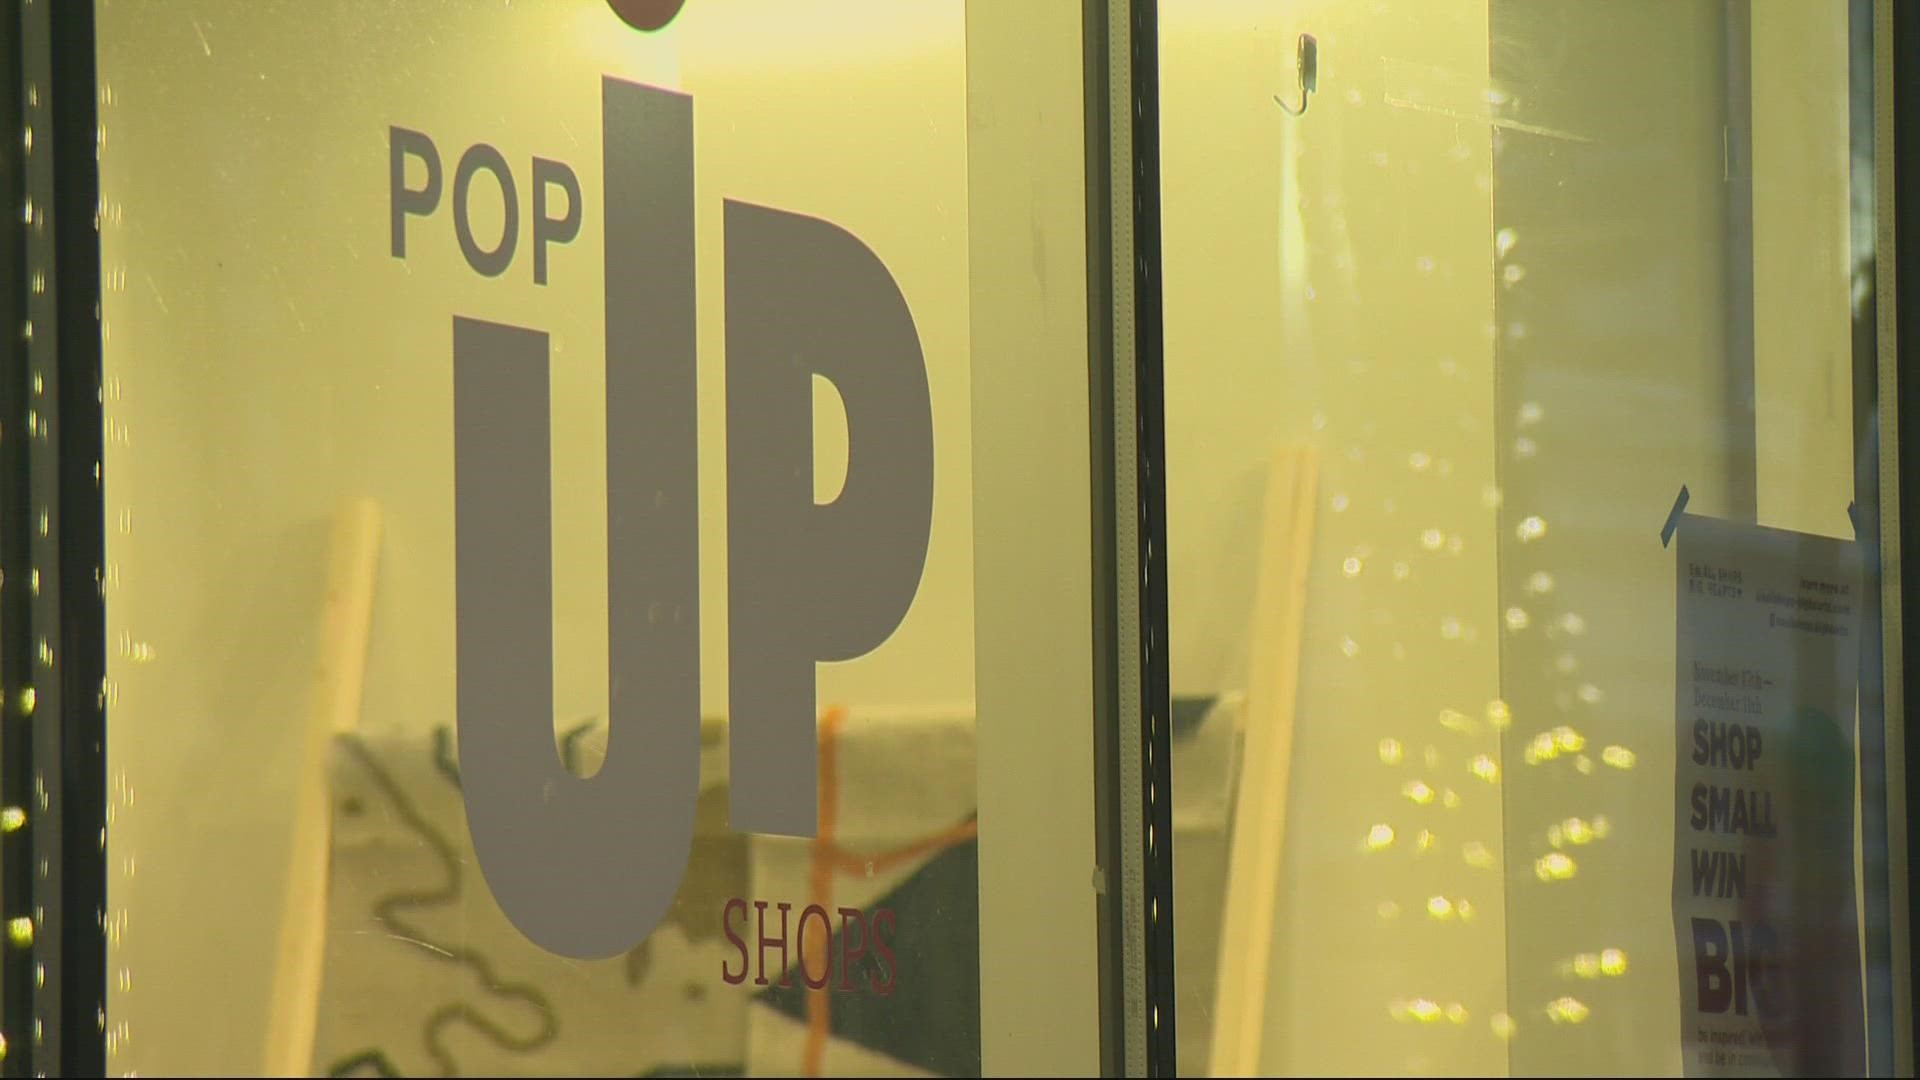 There are seven pop-up shops this year in vacant spaces in downtown buildings — each with about 80 businesses selling.